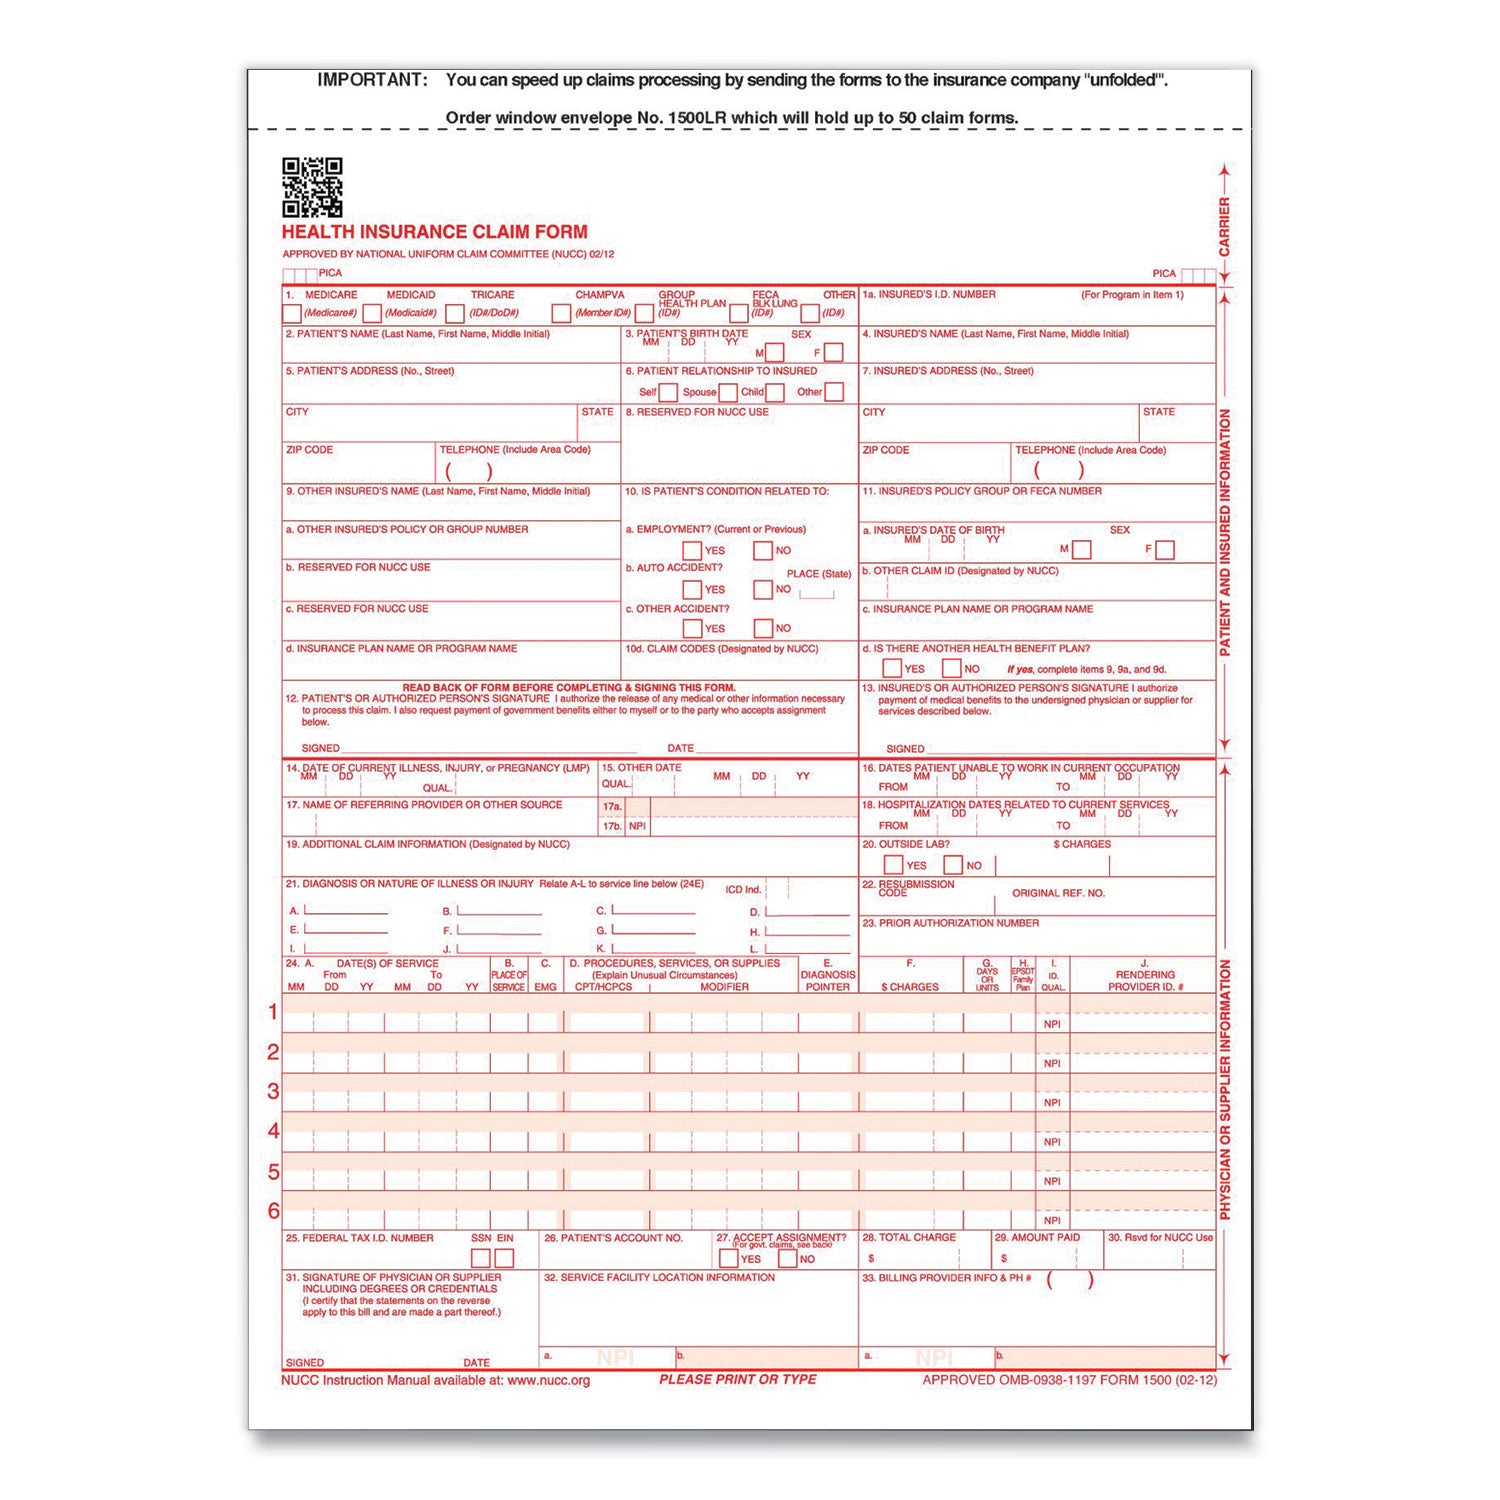 cms-1500-health-insurance-claim-form-one-part-no-copies-85-x-11-100-forms-total_tfp650657 - 1